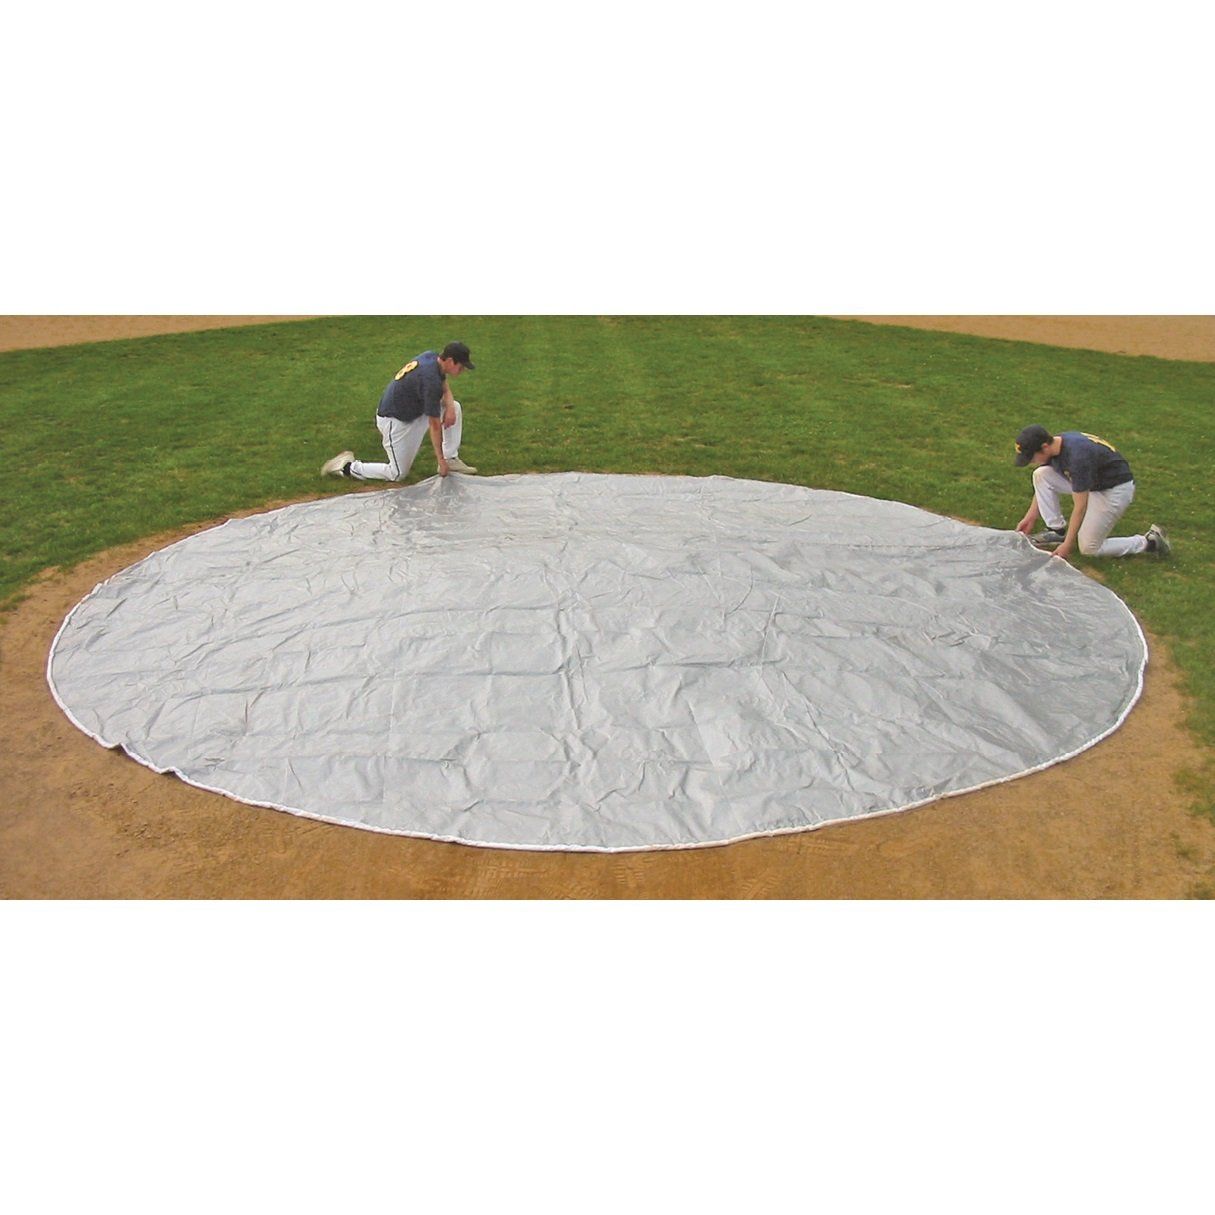 Cover Sports FieldSaver® Weighted Polyethylene Rain Spot Covers - Pitch Pro Direct